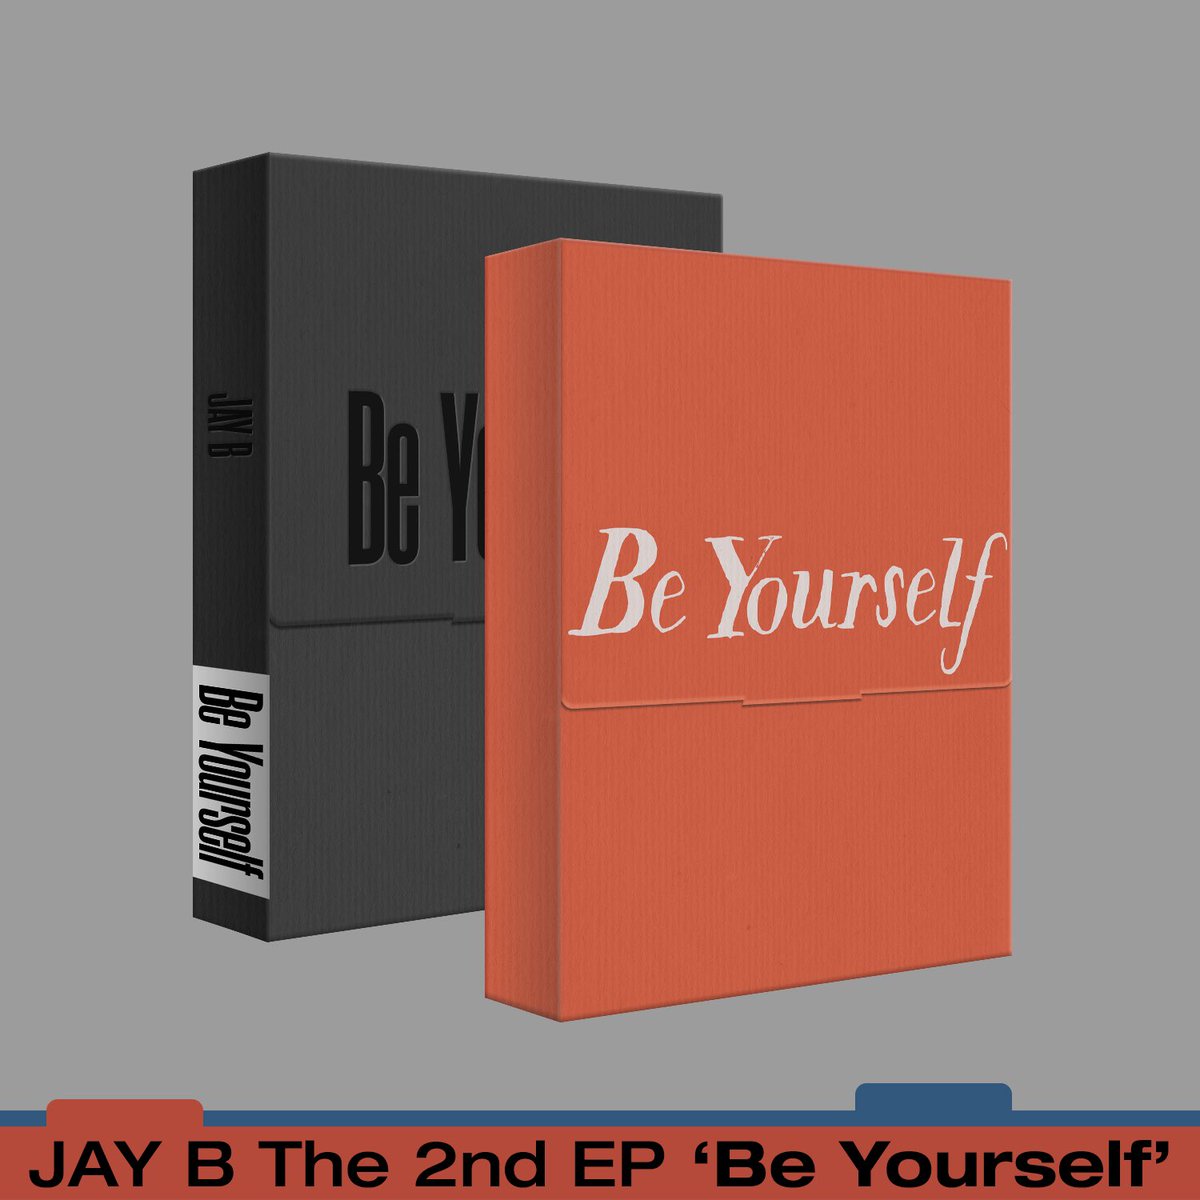 [#AECPHGO] JAY B - The 2nd EP [Be Yourself] PH GO PRICE: ALL IN + LSF&PF — ₱380 each — ₱760 set • Sealed album only • Both version available • From KR Supplier Normal ETA DOO: Until OOS DOP: — 50% payo — balance once October 30, 2022 FORM: forms.gle/u7cGfMNbb6DRVK…